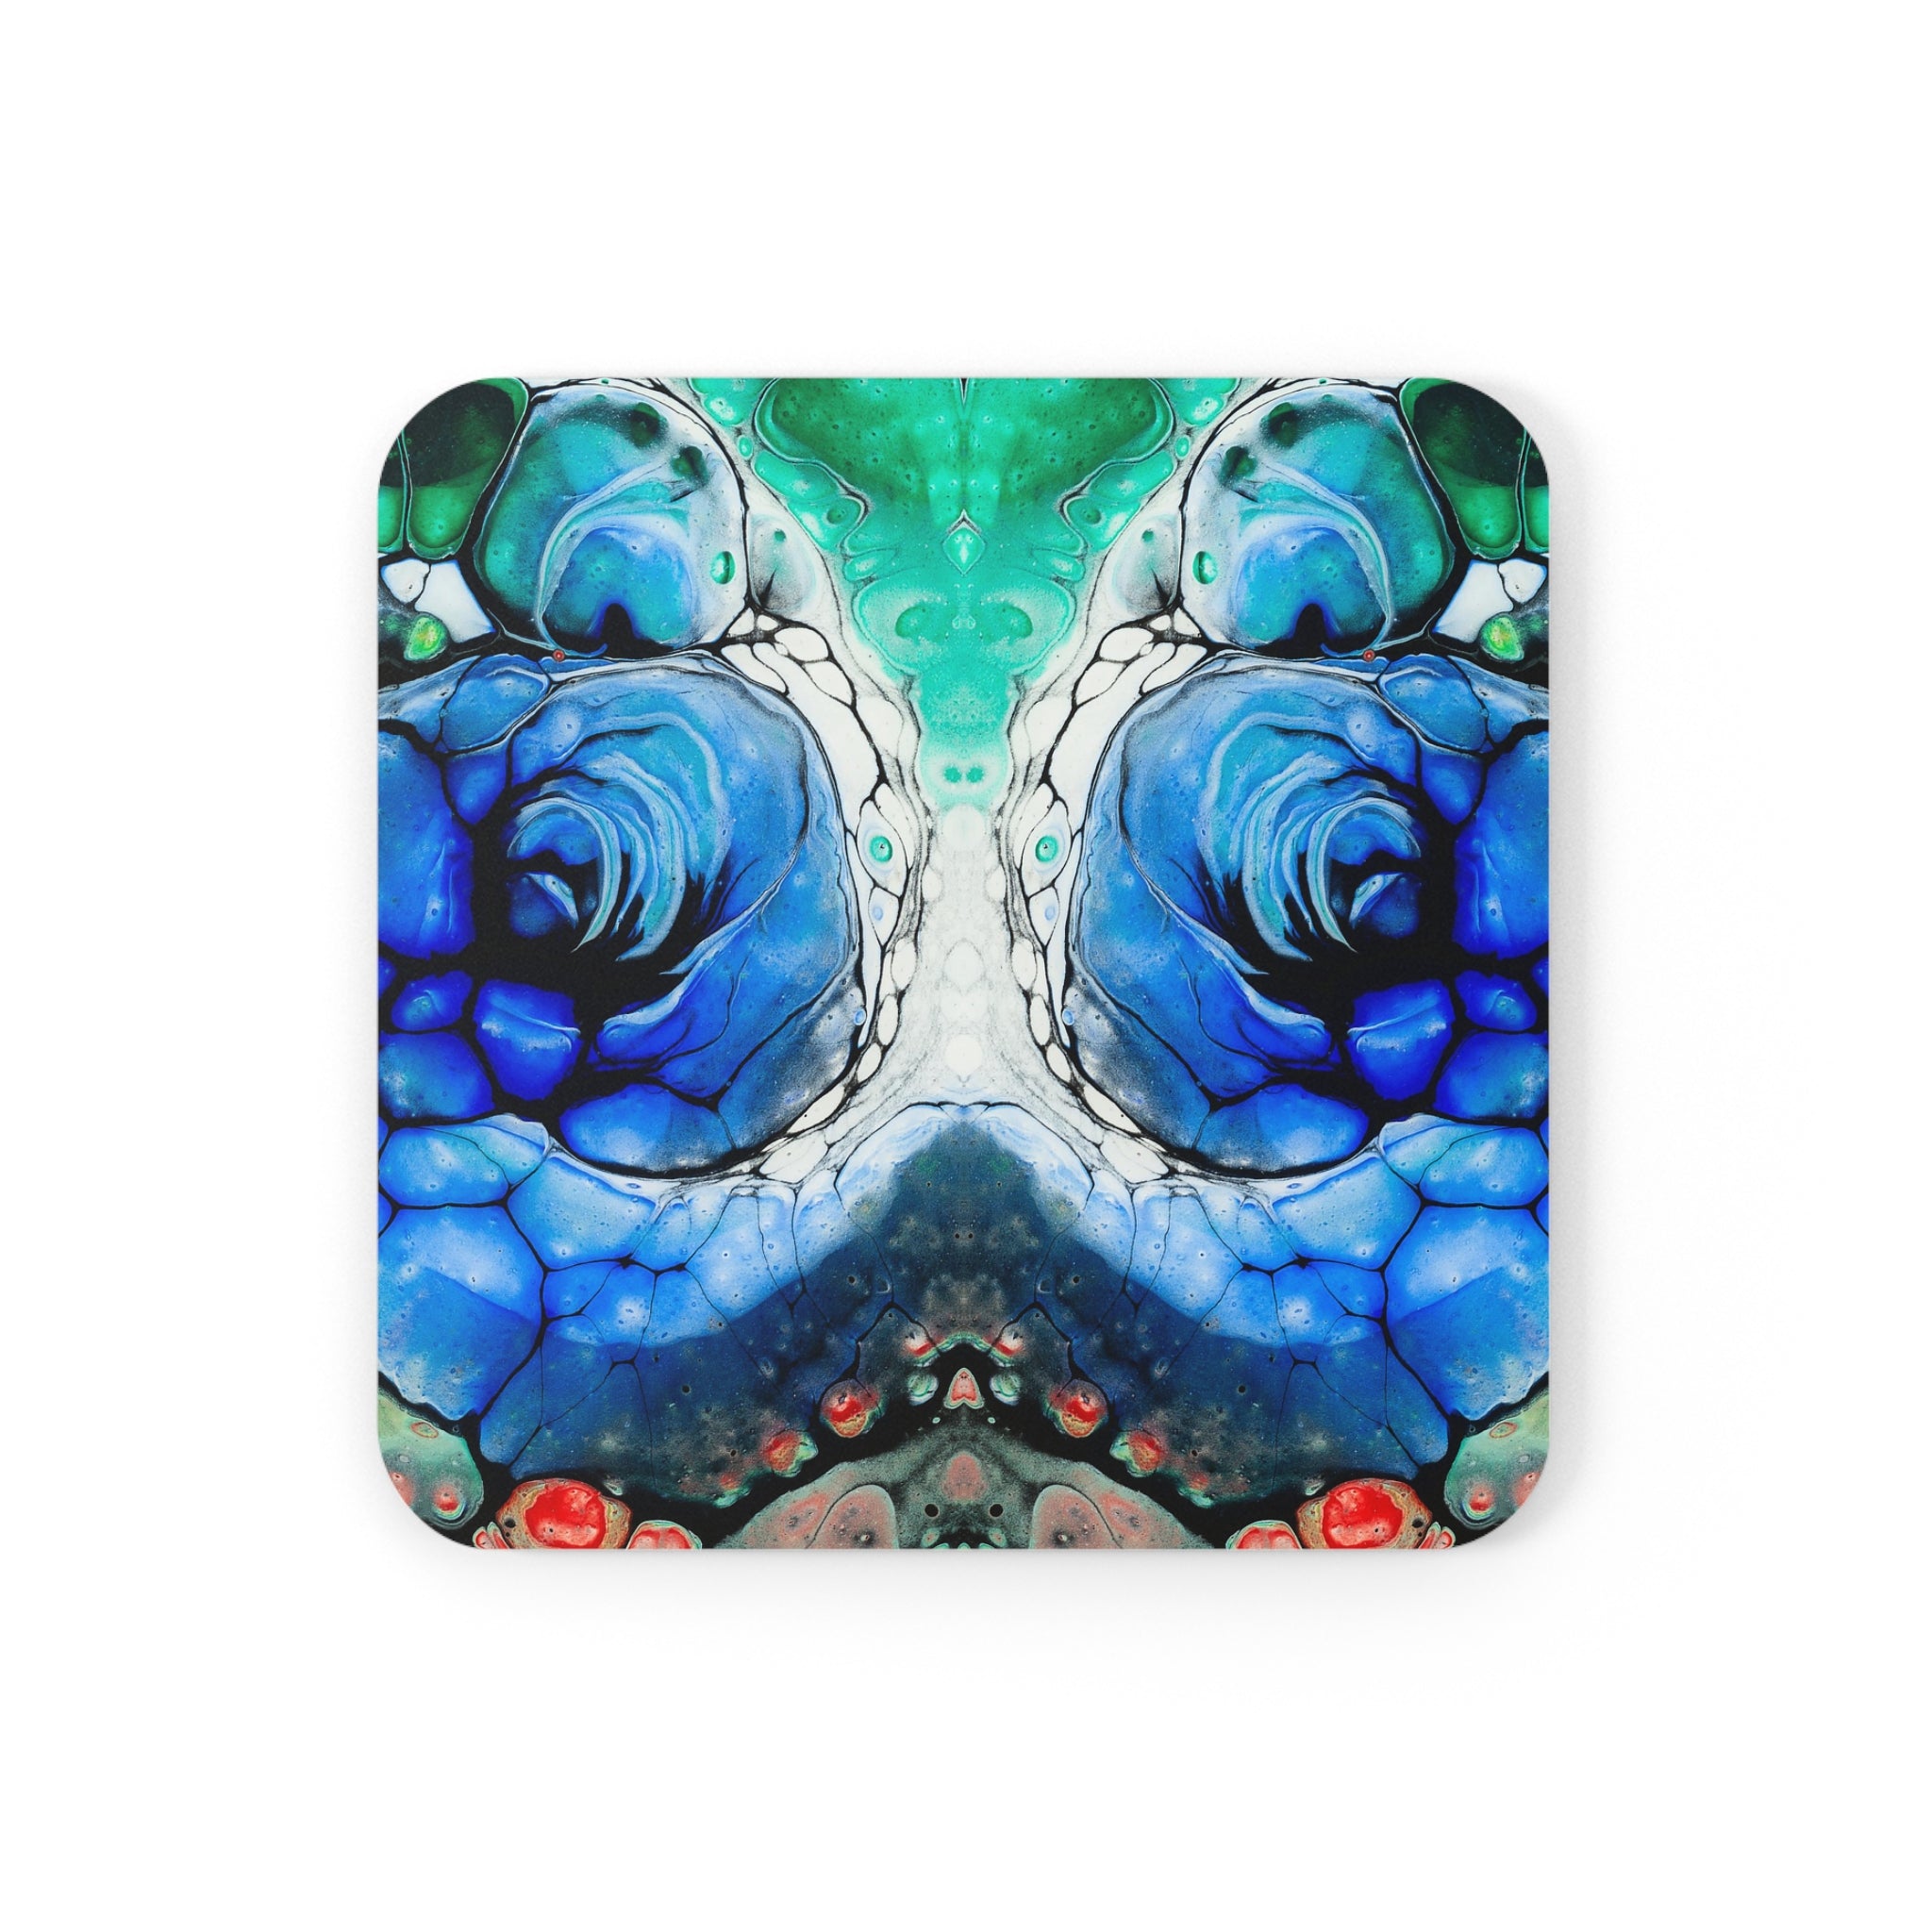 Cameron Creations - Blue Coil Portal - Stylish Coffee Coaster - Square Front